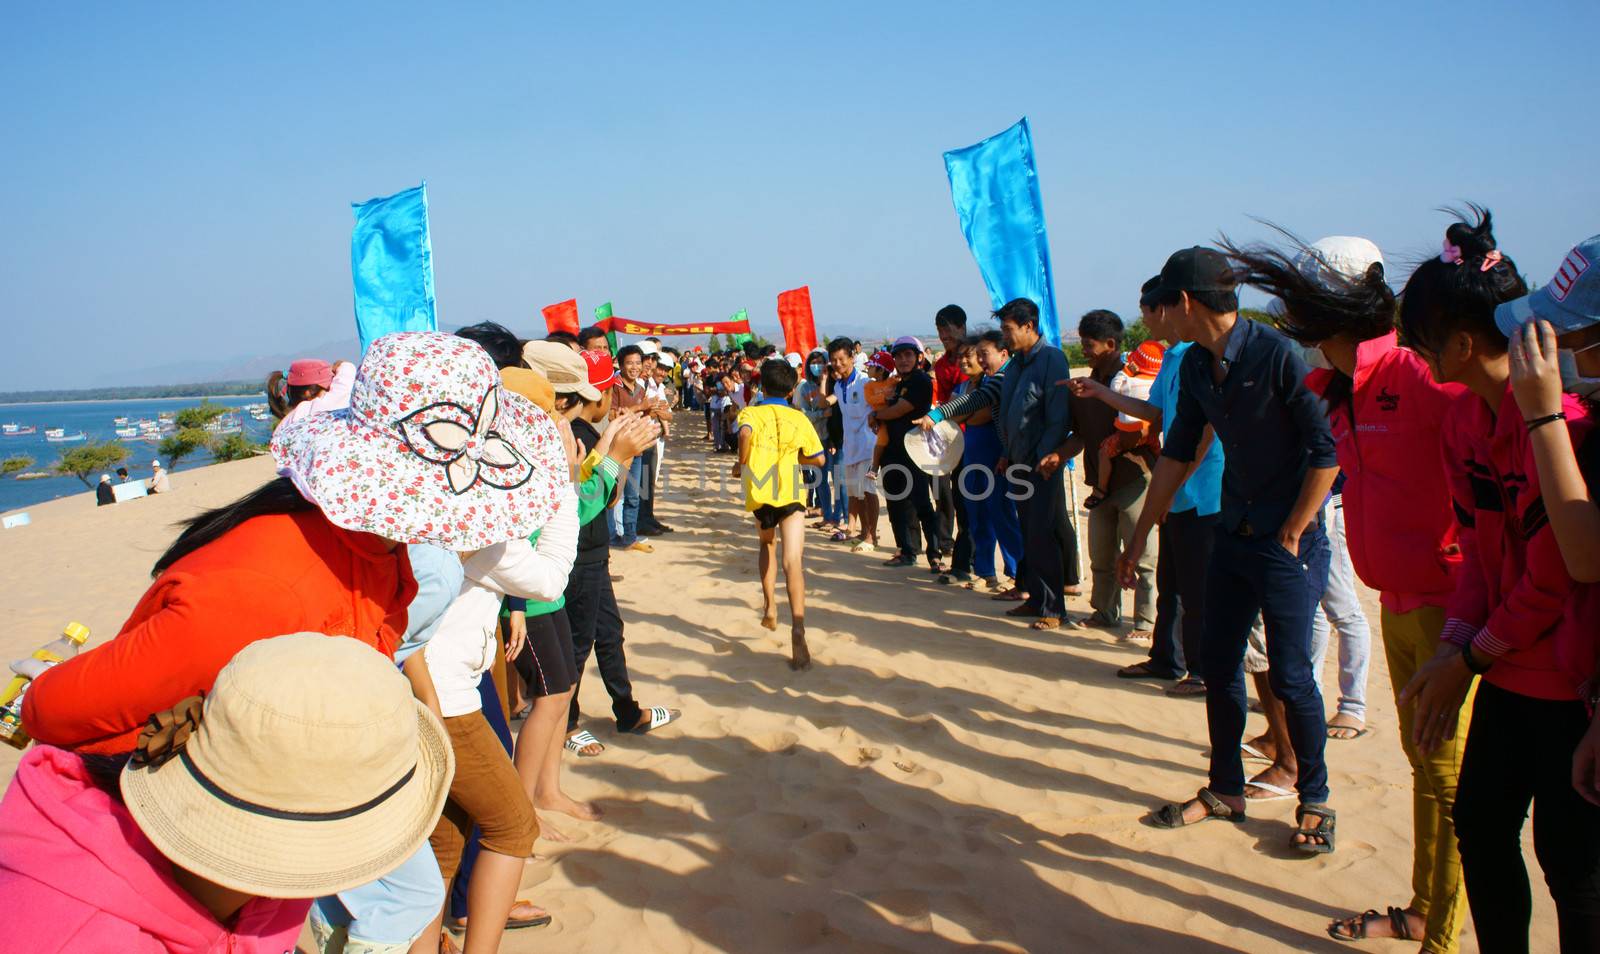 BINH THUAN, VIETNAM- FEB 14: Runner finish in marathon cross sand hill race, supporter standing in row to encourage, this's public sport activity to cheer healthy lifestyle, Viet Nam, Feb 14, 2014